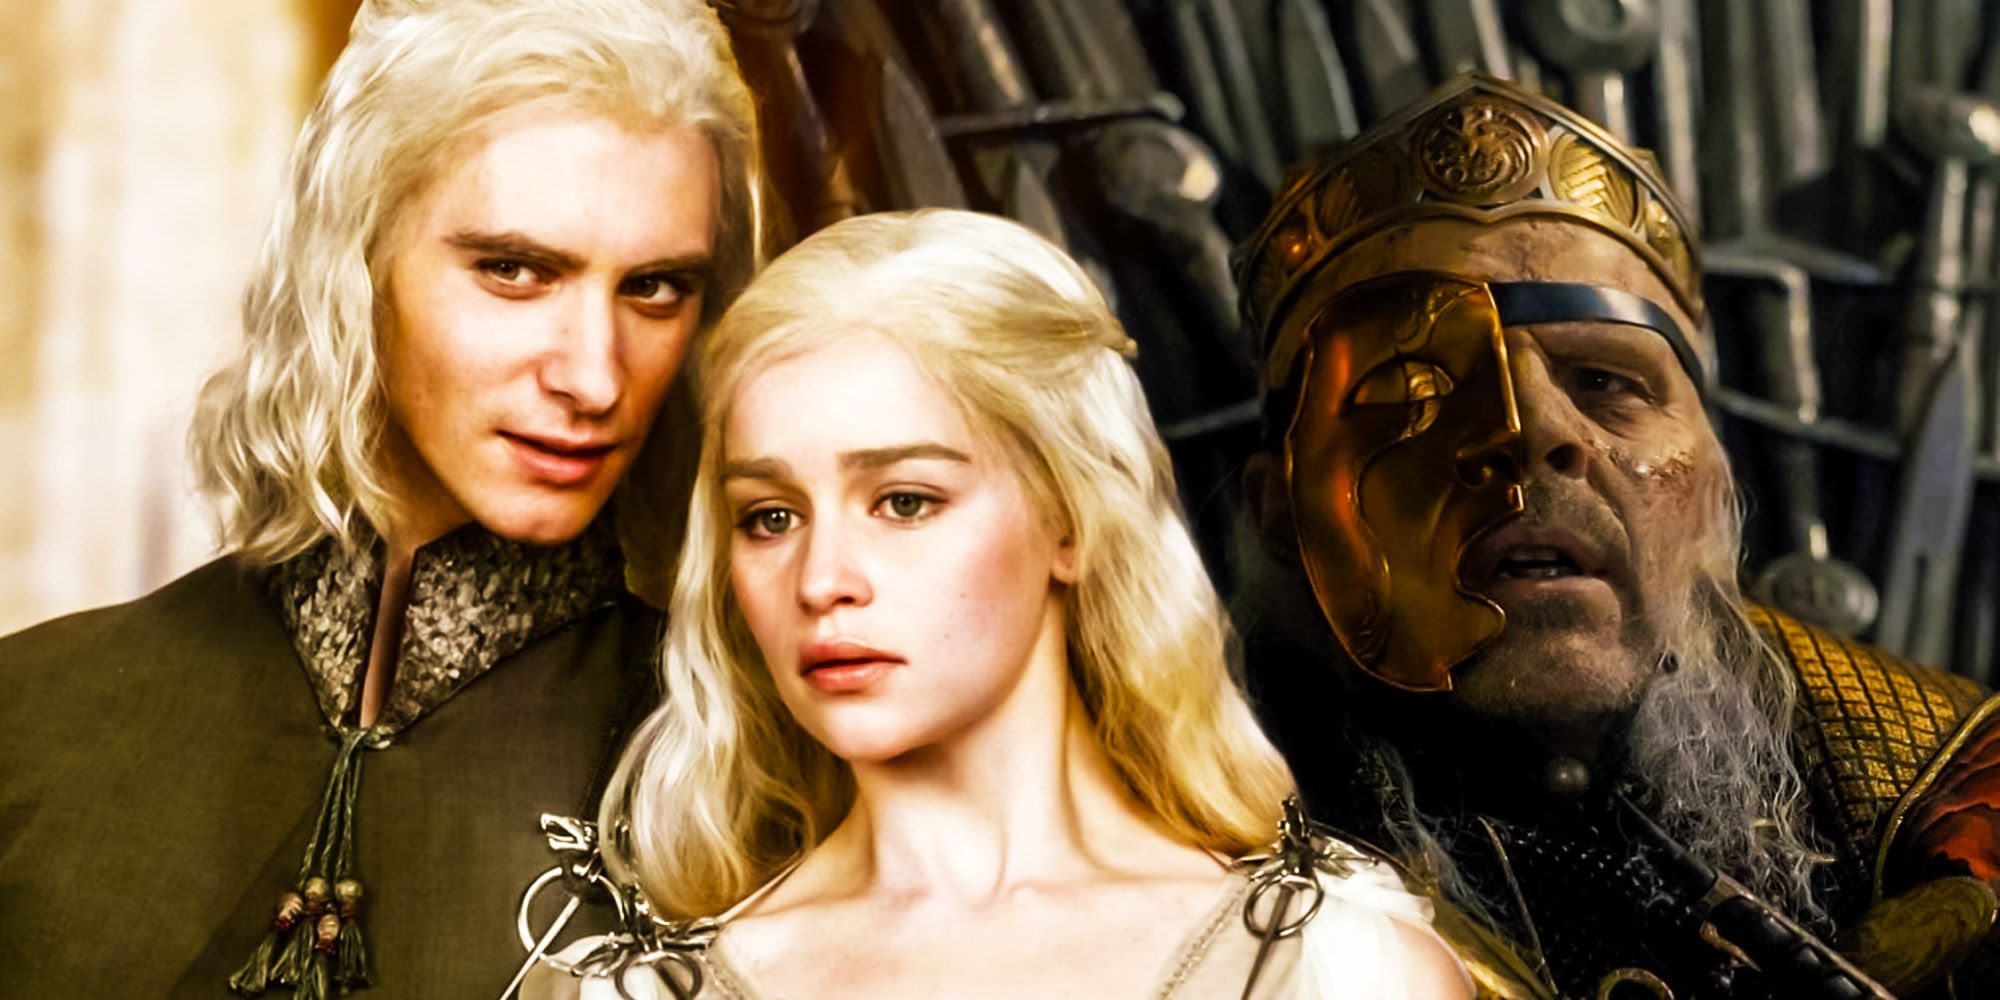 House of the dragon viserys game of thrones daenerys and her brother